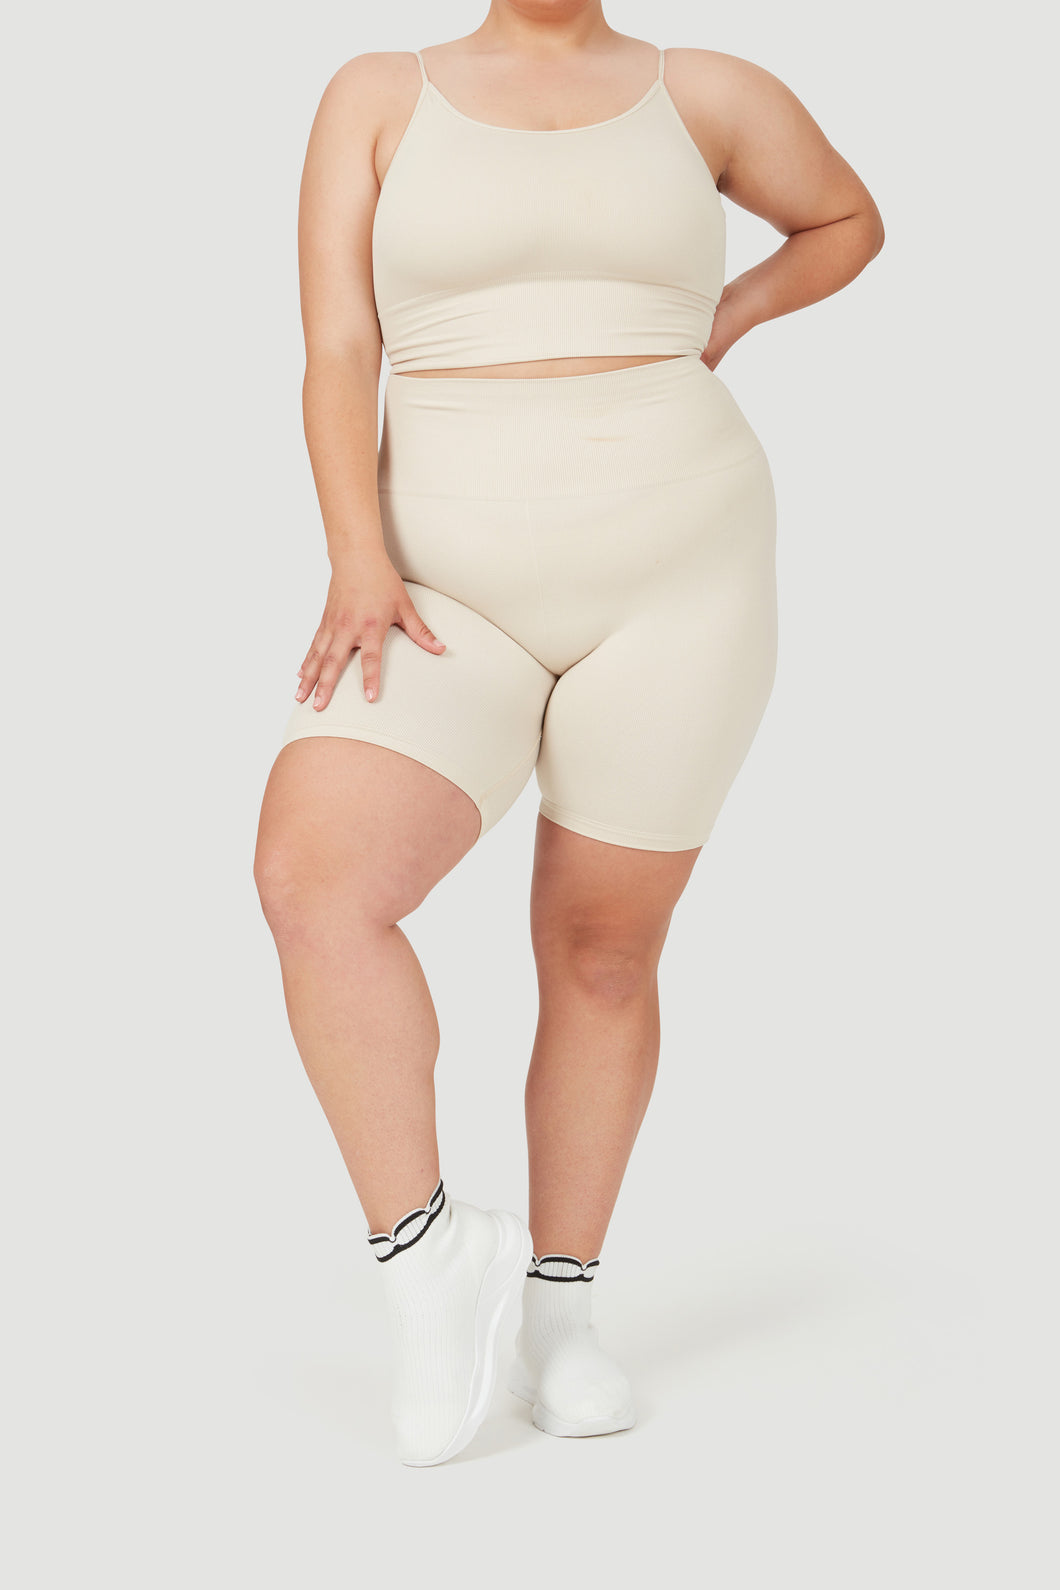 F&G Plain - Seamless Cycling Shorts With Wide Wasitband Ivory